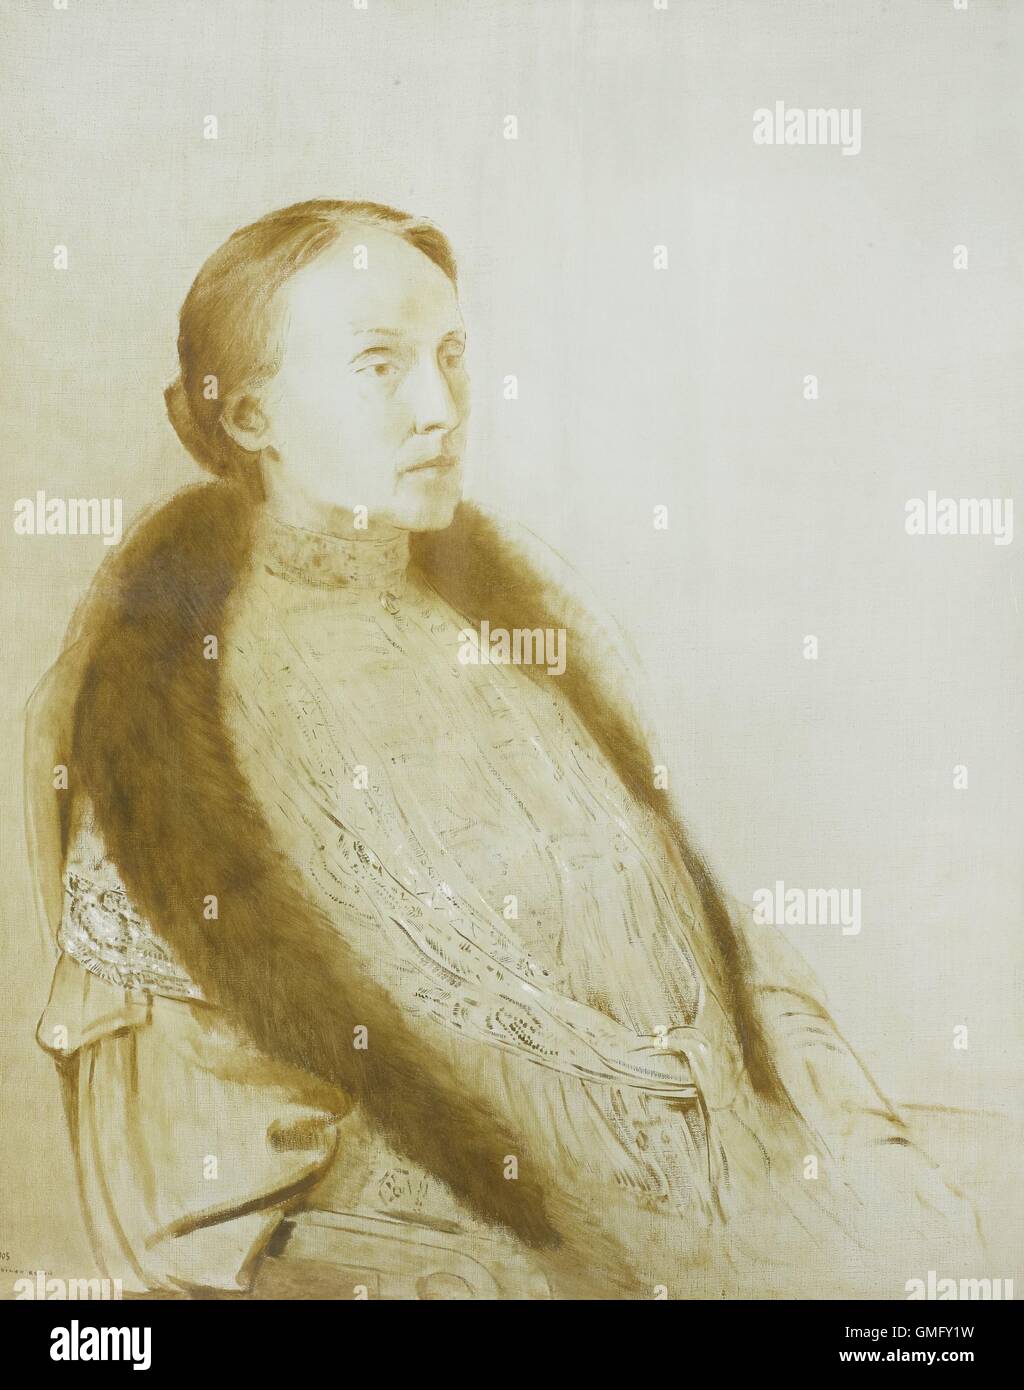 Portrait of A.M.L. Bonger-van der Linden, by Odilon Redon, 1905, French painting, oil on canvas. Monochrome painting of the wife of the art collector Andrc Bonger (BSLOC 2016 2 62) Stock Photo